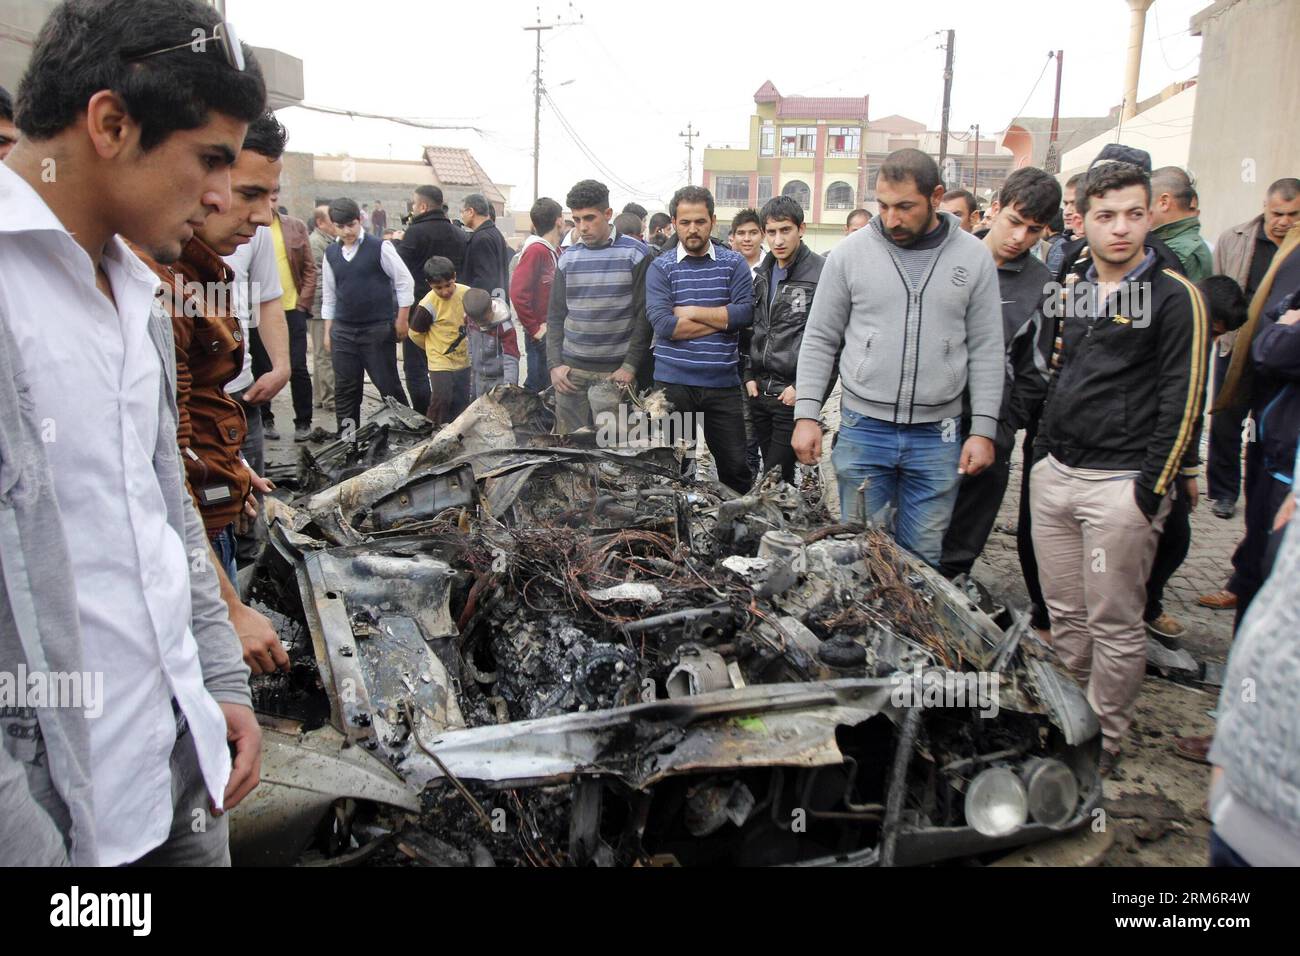 (140126) -- KIRKUK, Jan. 26, 2014 (Xinhua) -- People gather around a damaged vehicle at the blast site in Kirkuk, Iraq, on Jan. 26, 2014. At least four people were killed and 14 wounded in the afternoon when three car bombs detonated almost simultaneously in separate neighborhoods in the city of Kirkuk, some 250 km north of the Iraqi capital of Baghdad, a local police source told Xinhua on condition of anonymity. (Xinhua/Dena Assad) (zjl) IRAQ-KIRKUK-BLAST PUBLICATIONxNOTxINxCHN   Kirkuk Jan 26 2014 XINHUA Celebrities gather Around a damaged Vehicle AT The Blast Site in Kirkuk Iraq ON Jan 26 2 Stock Photo